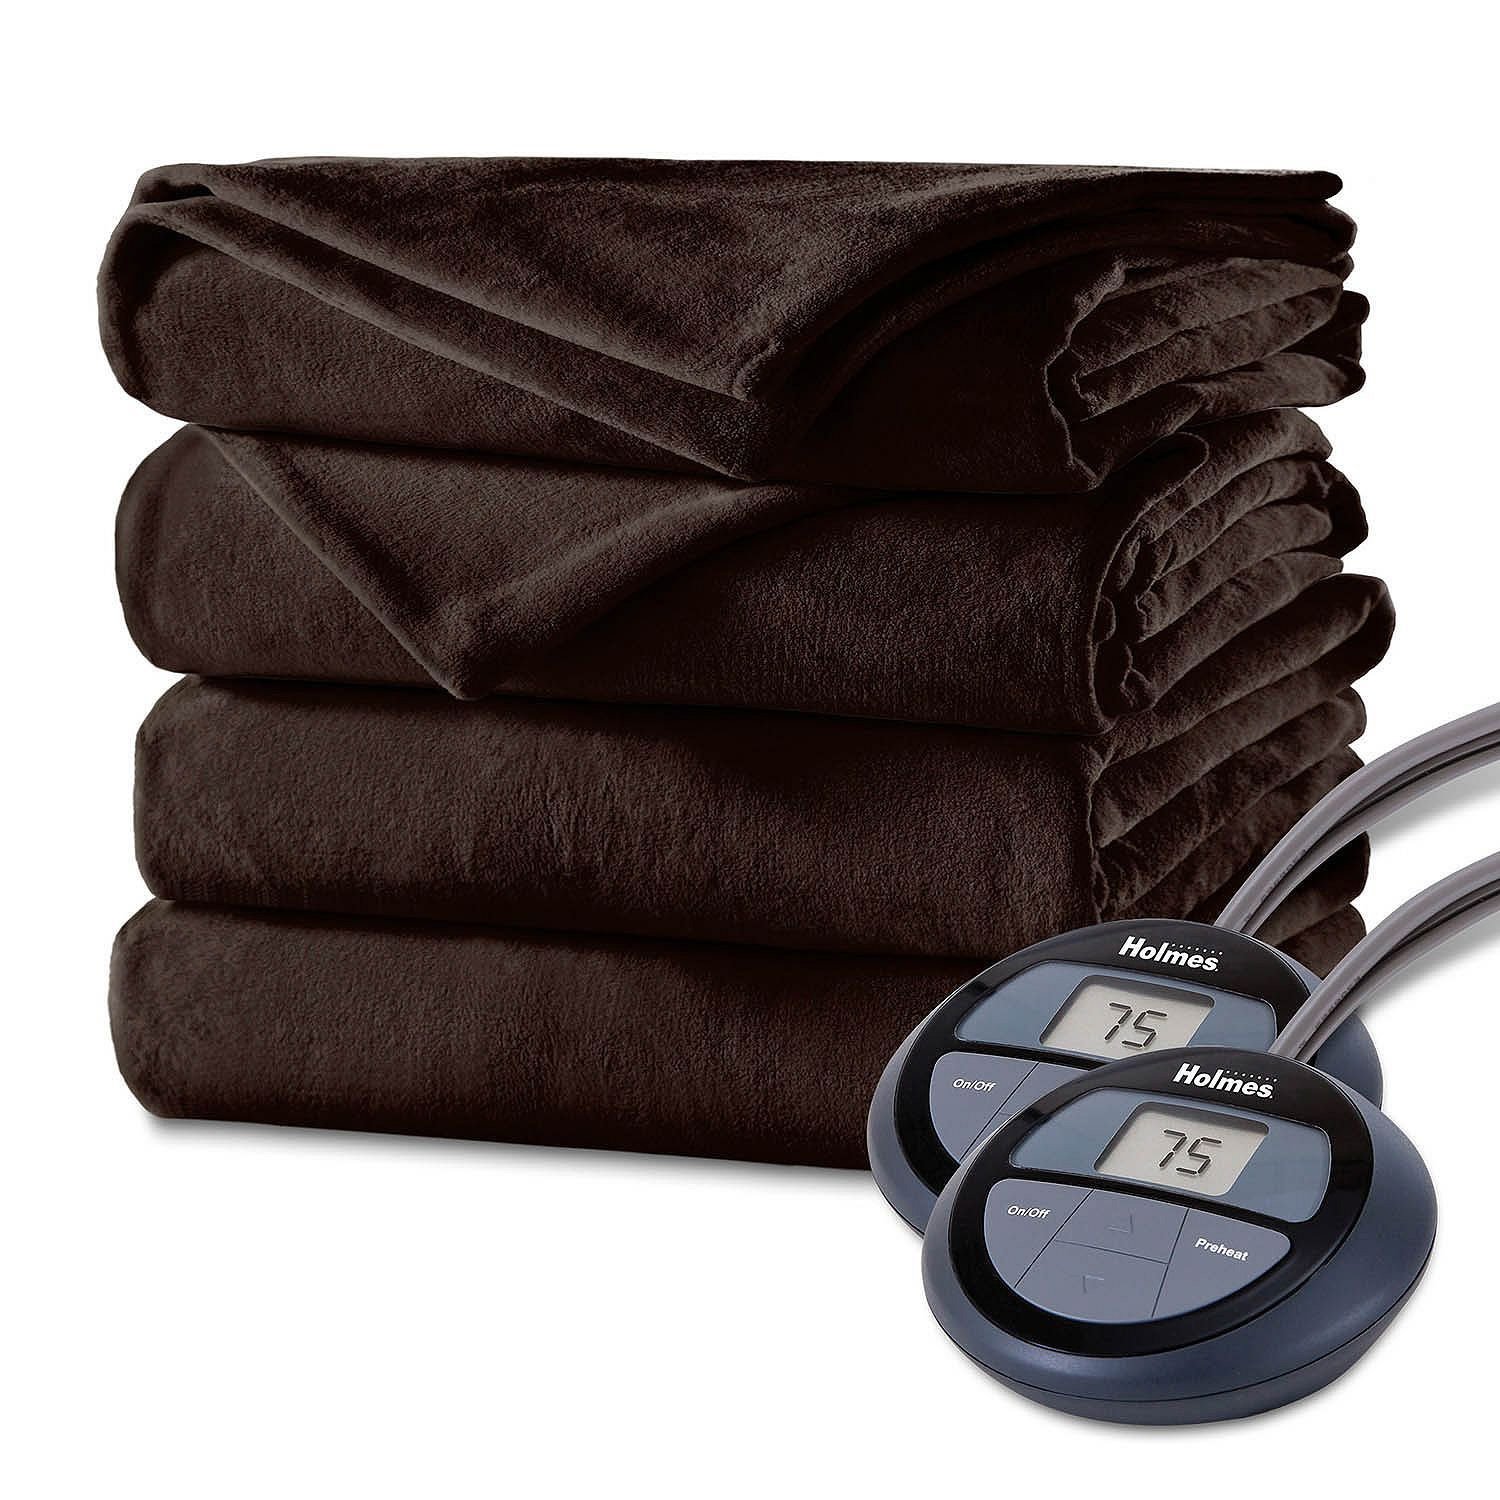 Holmes Luxury Velvet Plush Heated Blanket (Various Sizes and Colors) - Heated Blankets